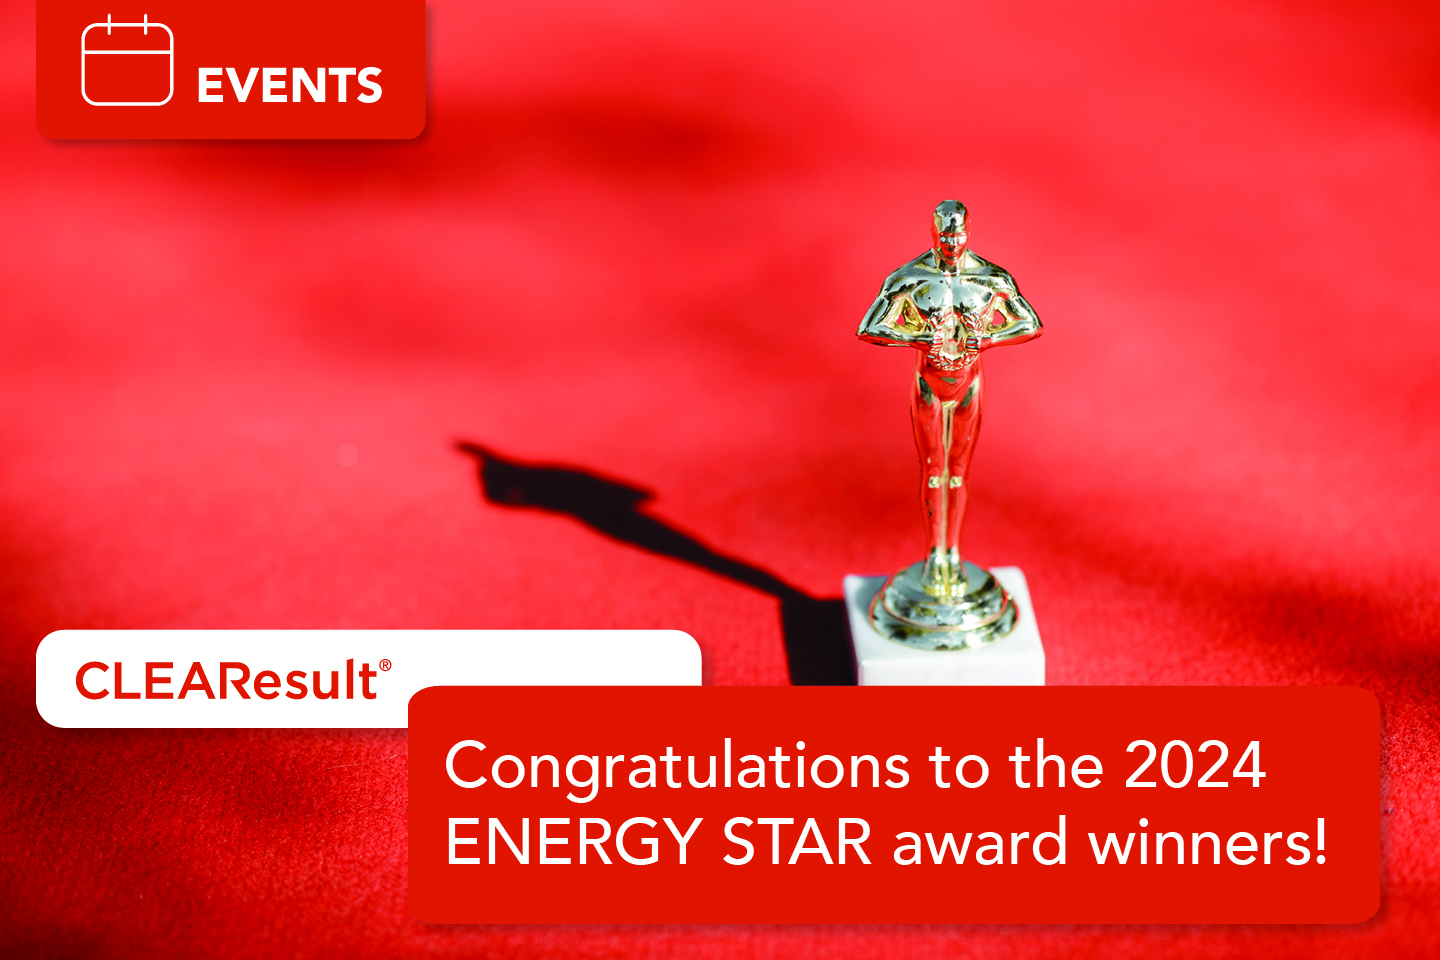 Congratulations to the 2024 ENERGY STAR award winners!